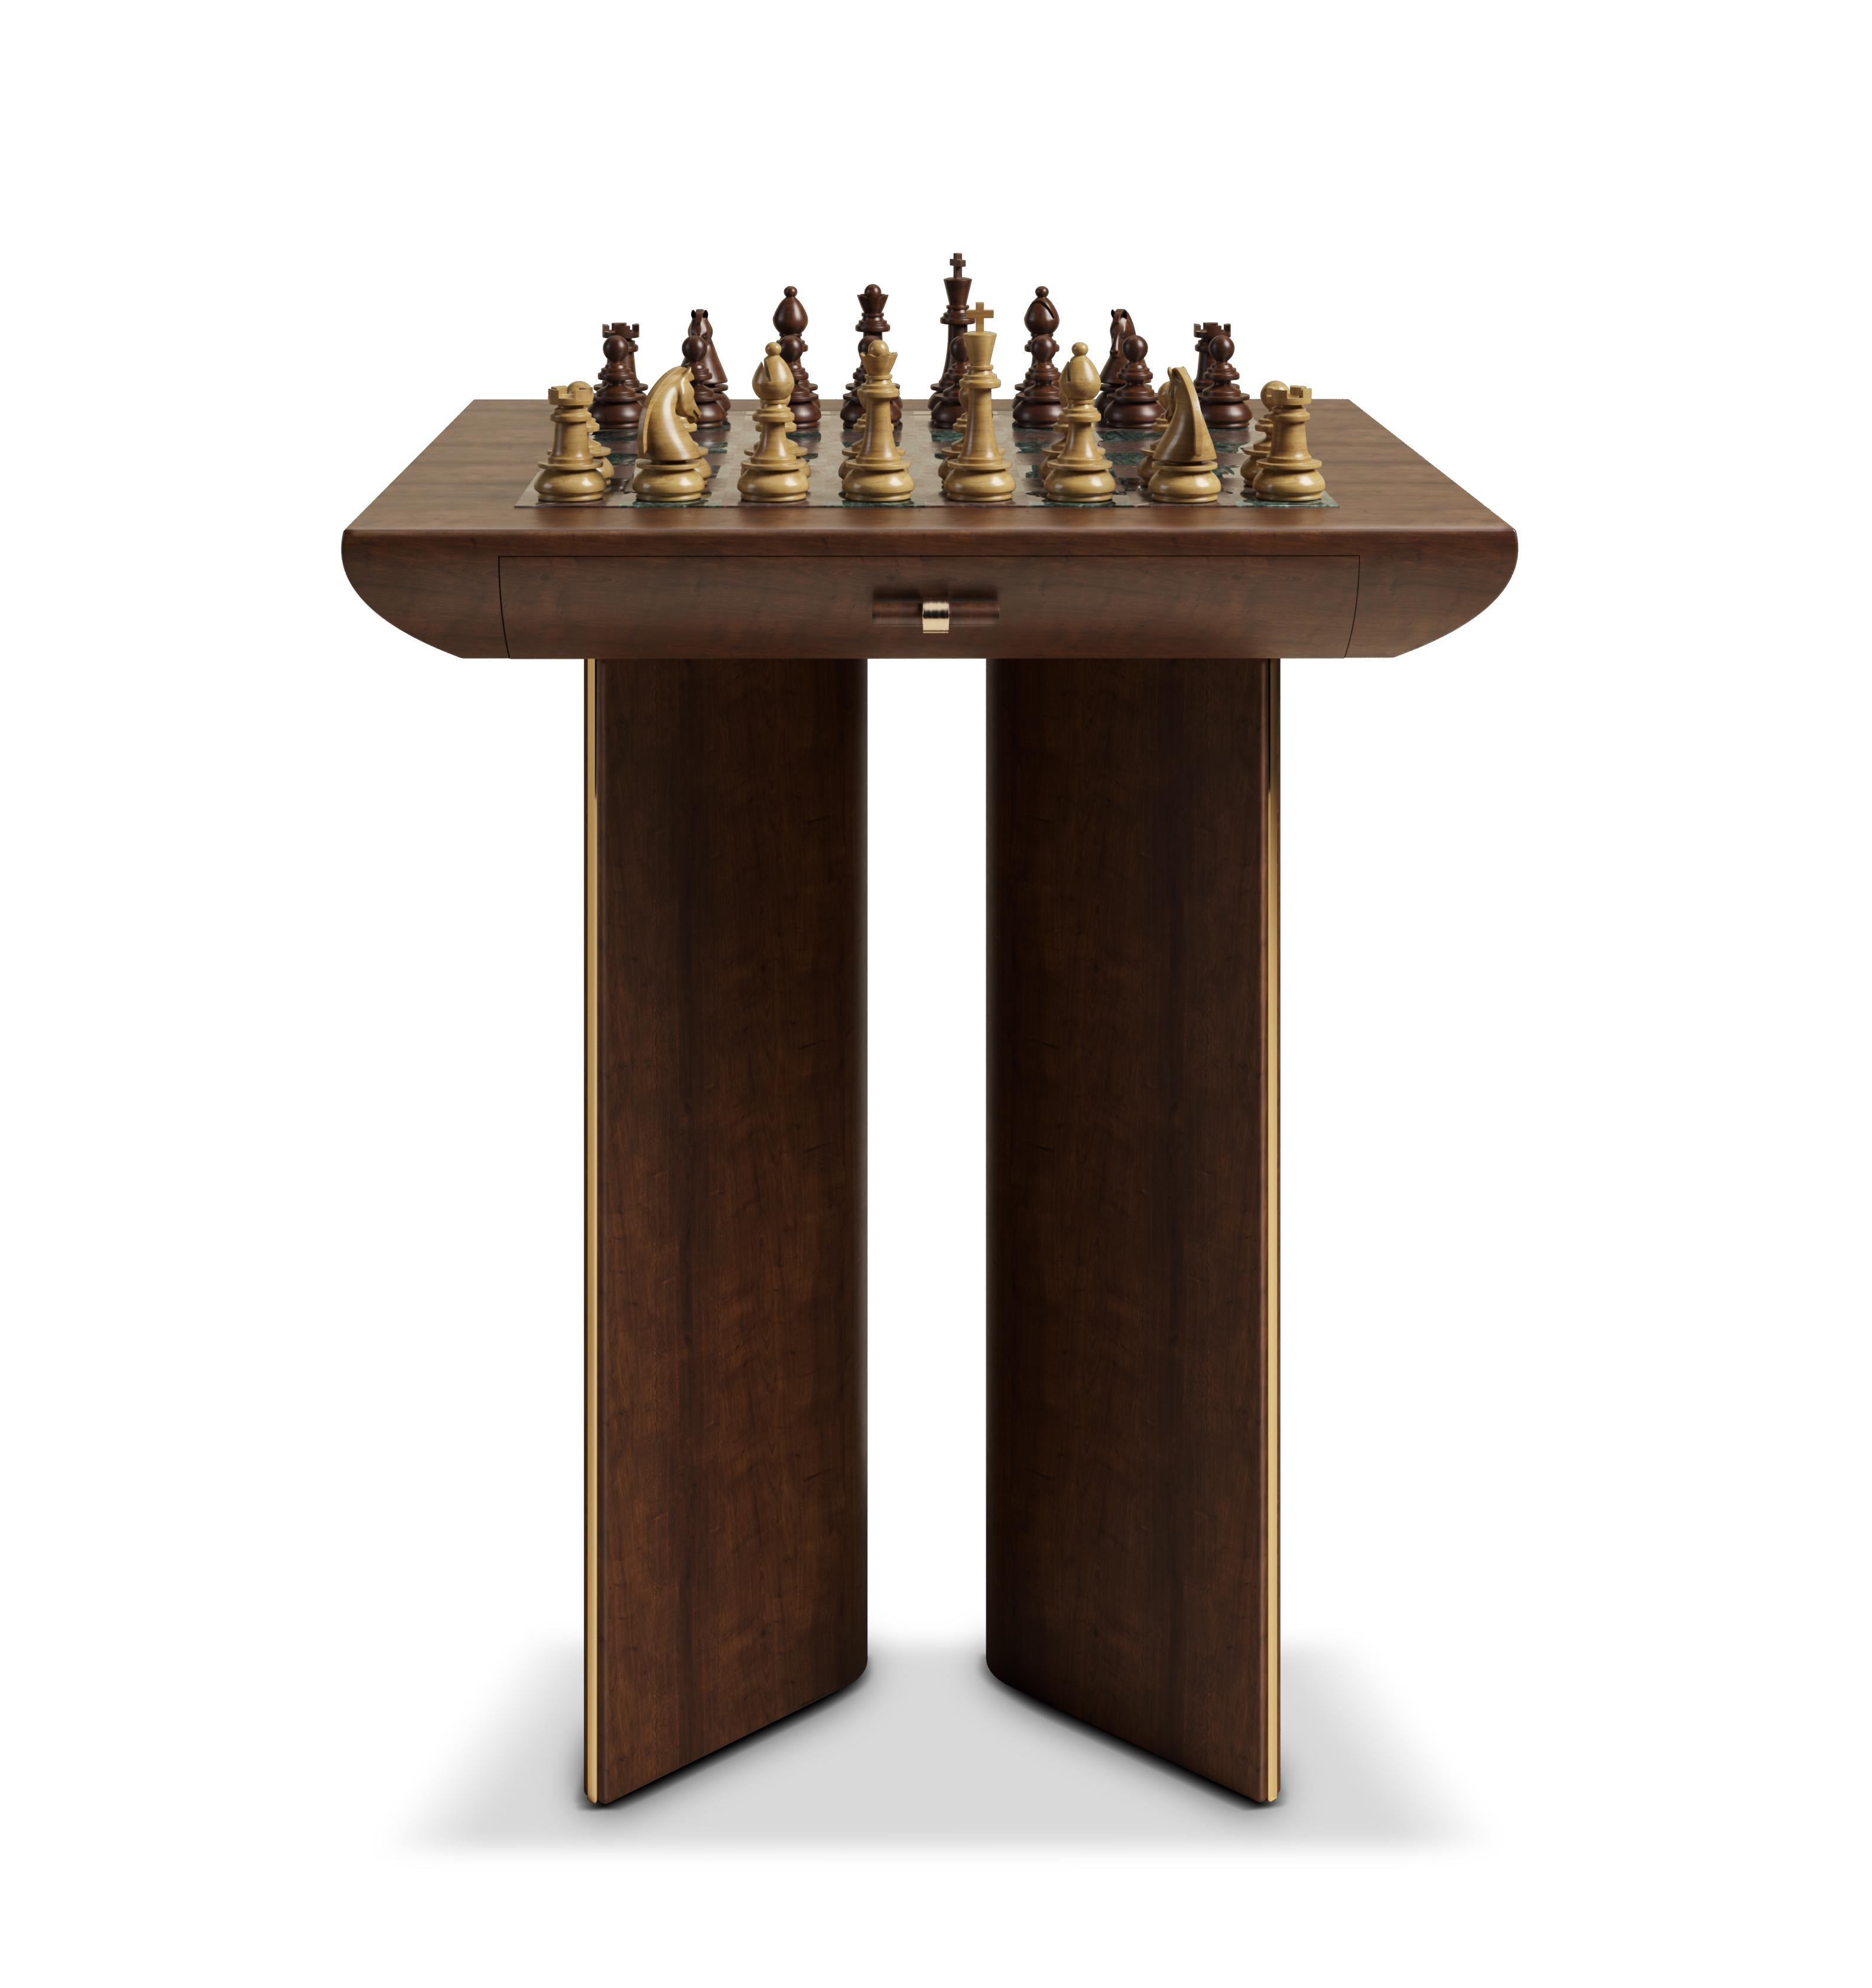 Portuguese 21st Century Howard Chess Table Walnut Wood by Wood Tailors Club For Sale